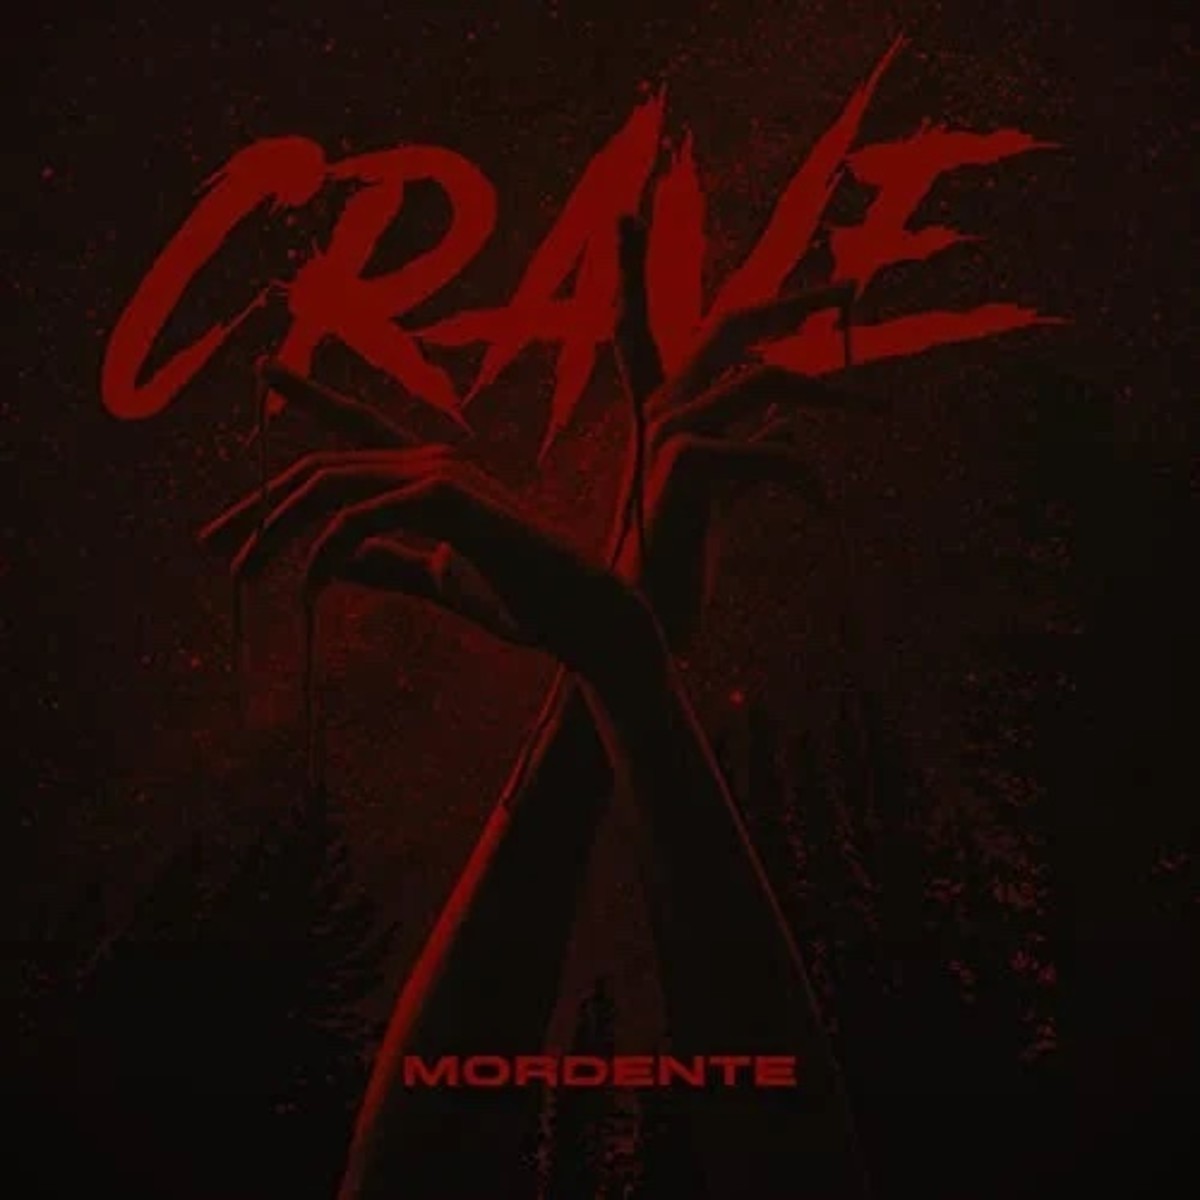 synth-single-review-crave-by-mordente